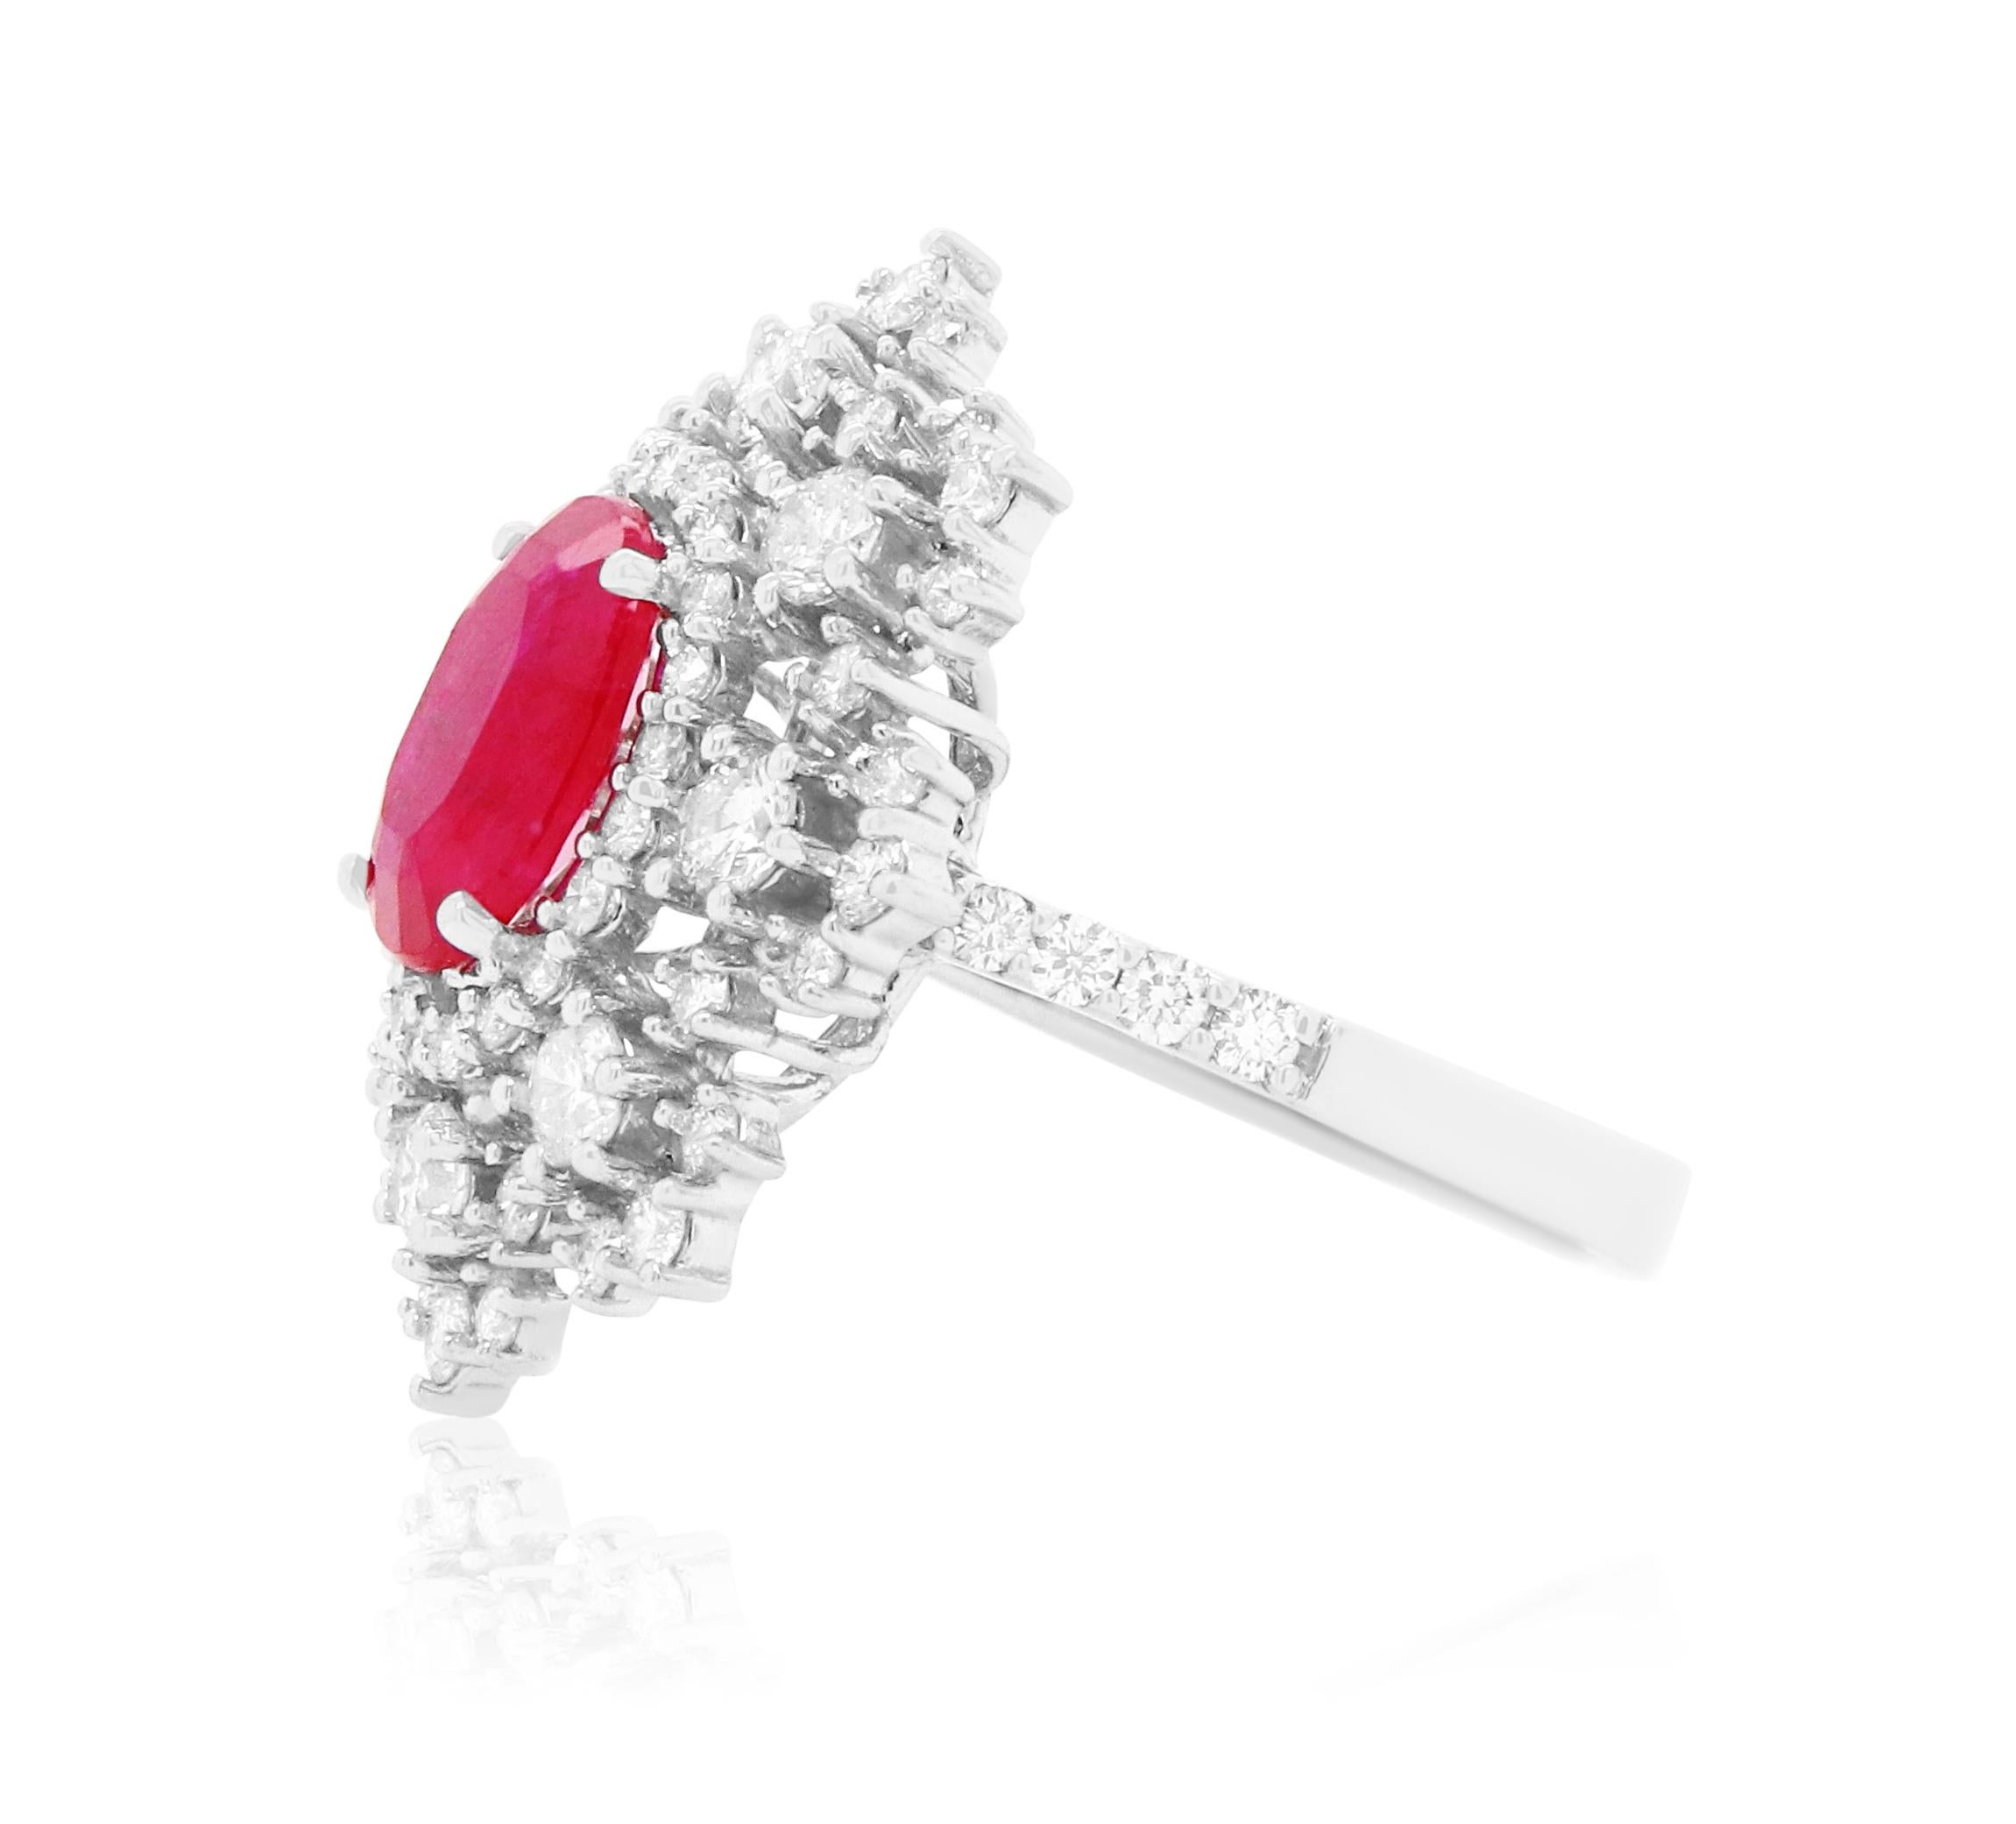 Material: 14k White Gold 
Center Stone Details: 2.54 Carat Oval Ruby measuring 9.6 x 8.2 mm
Mounting Diamond Details: 70 Brilliant Round White Diamonds at 1.75 Carats - Clarity: SI / Color: H-I
Complimentary sizing on all Alberto rings

Fine